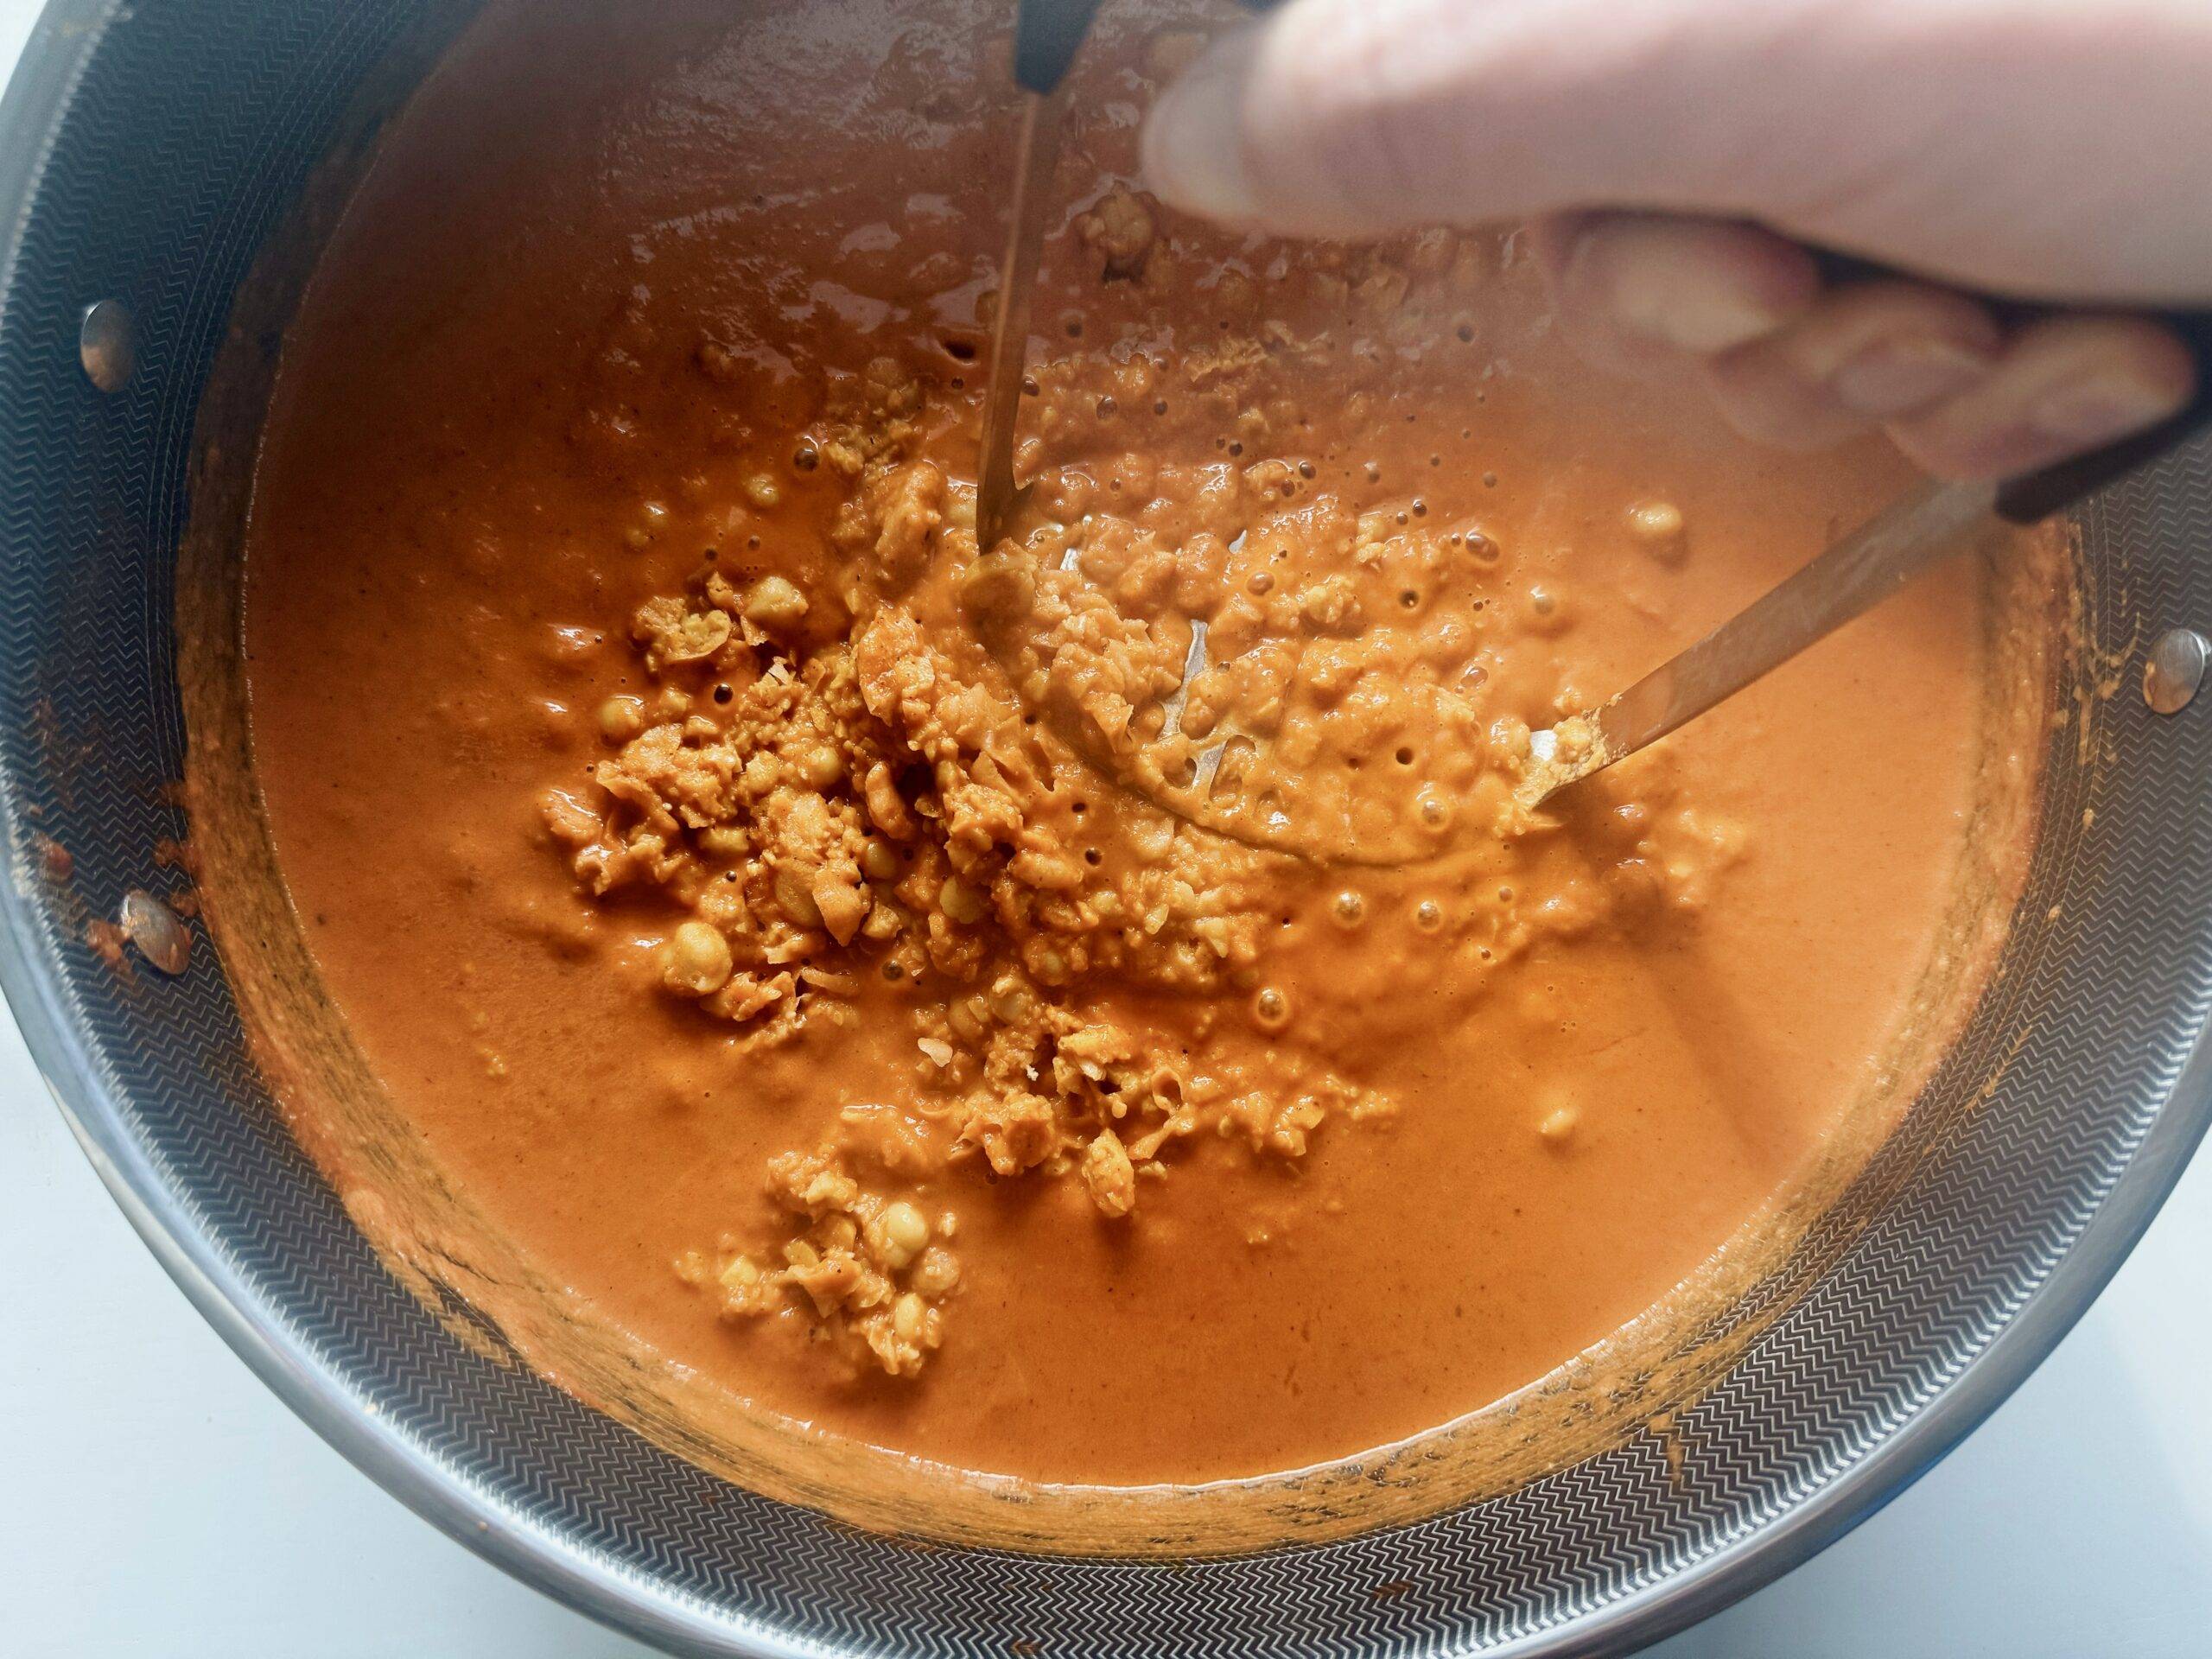 Mashing chickpeas in a pot with sauce.